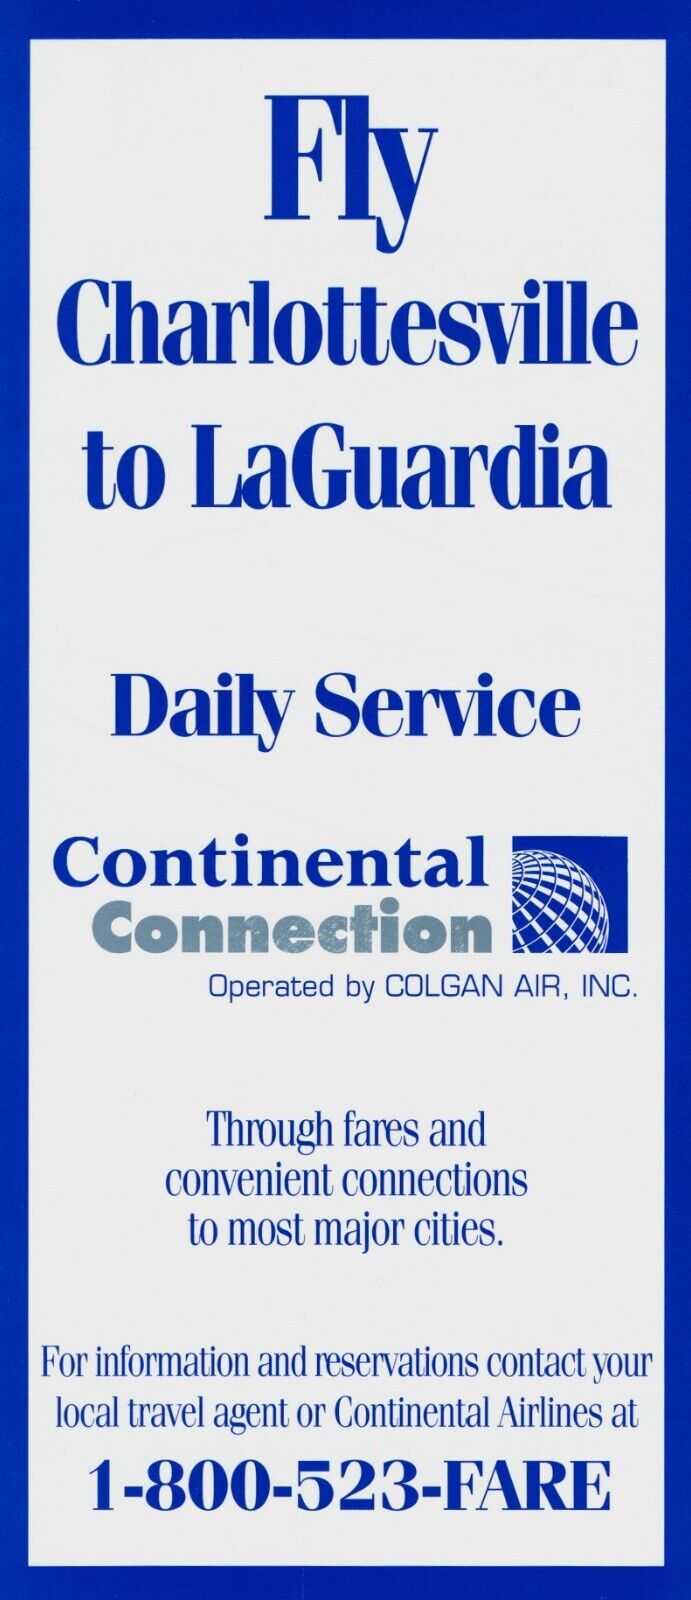 Colgan Air / Continental Connection Route Timetable   September 9, 1998 =